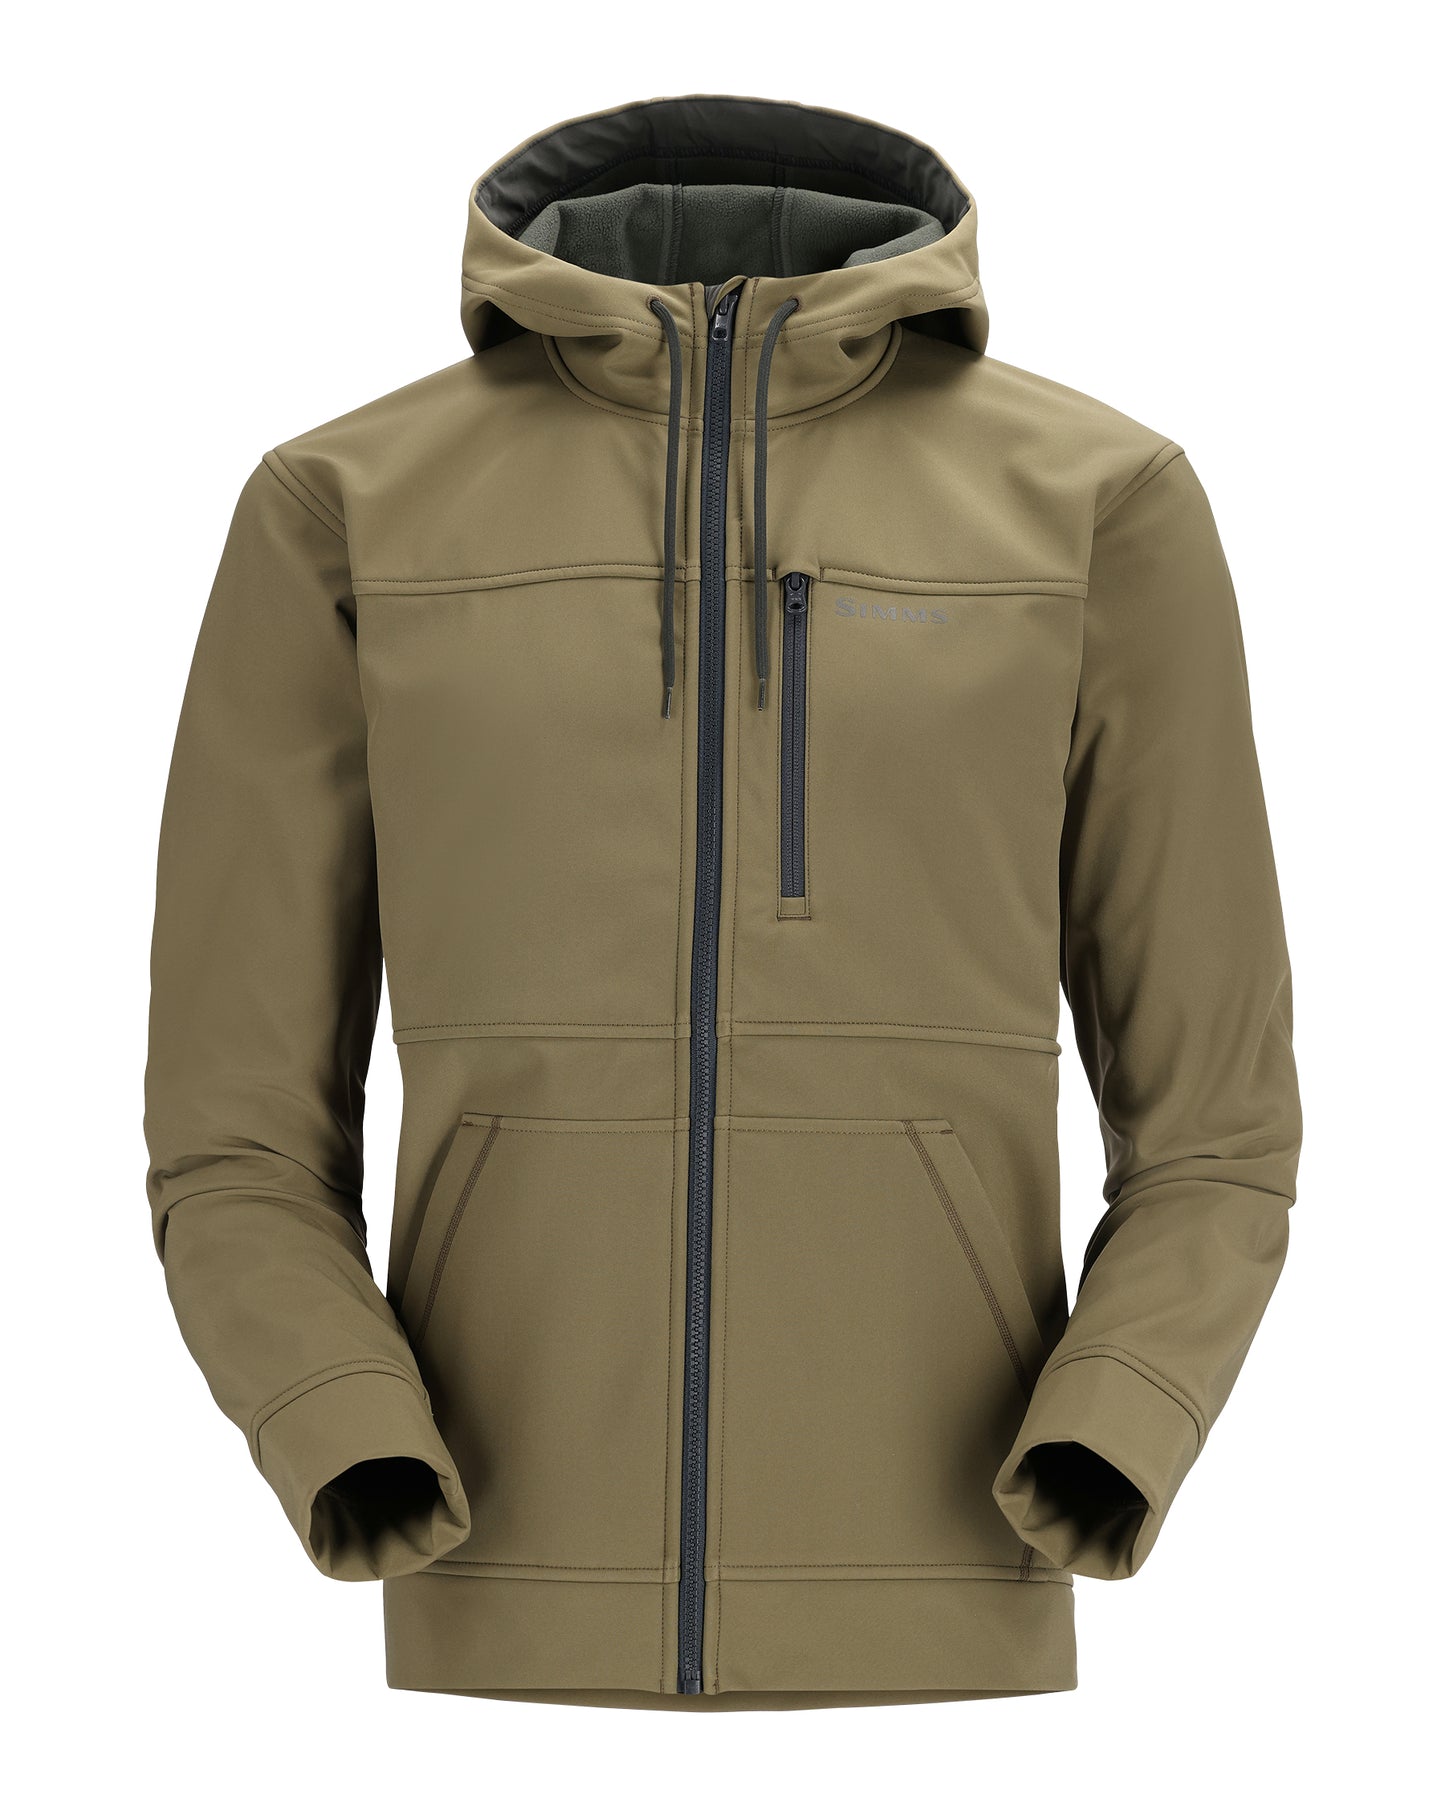 12654-781-rogue-hoody-mannequin-f22-front